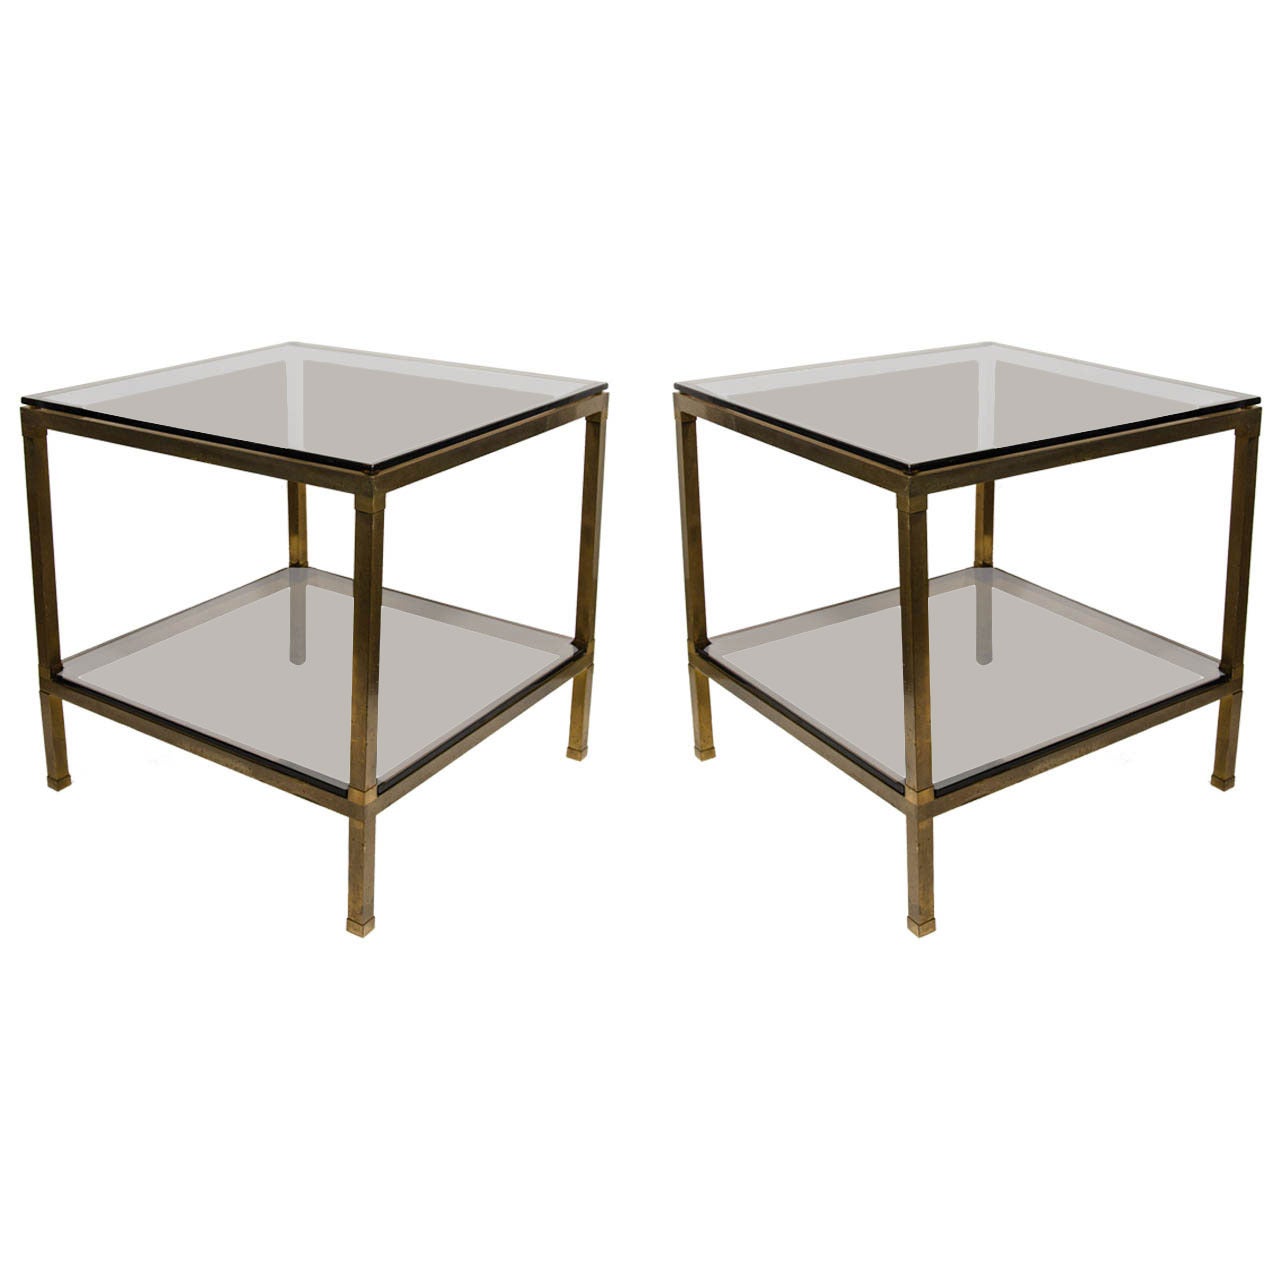 Pair of Modern Brass & Smoked Glass End Tables Attributed to Guy Lefevre